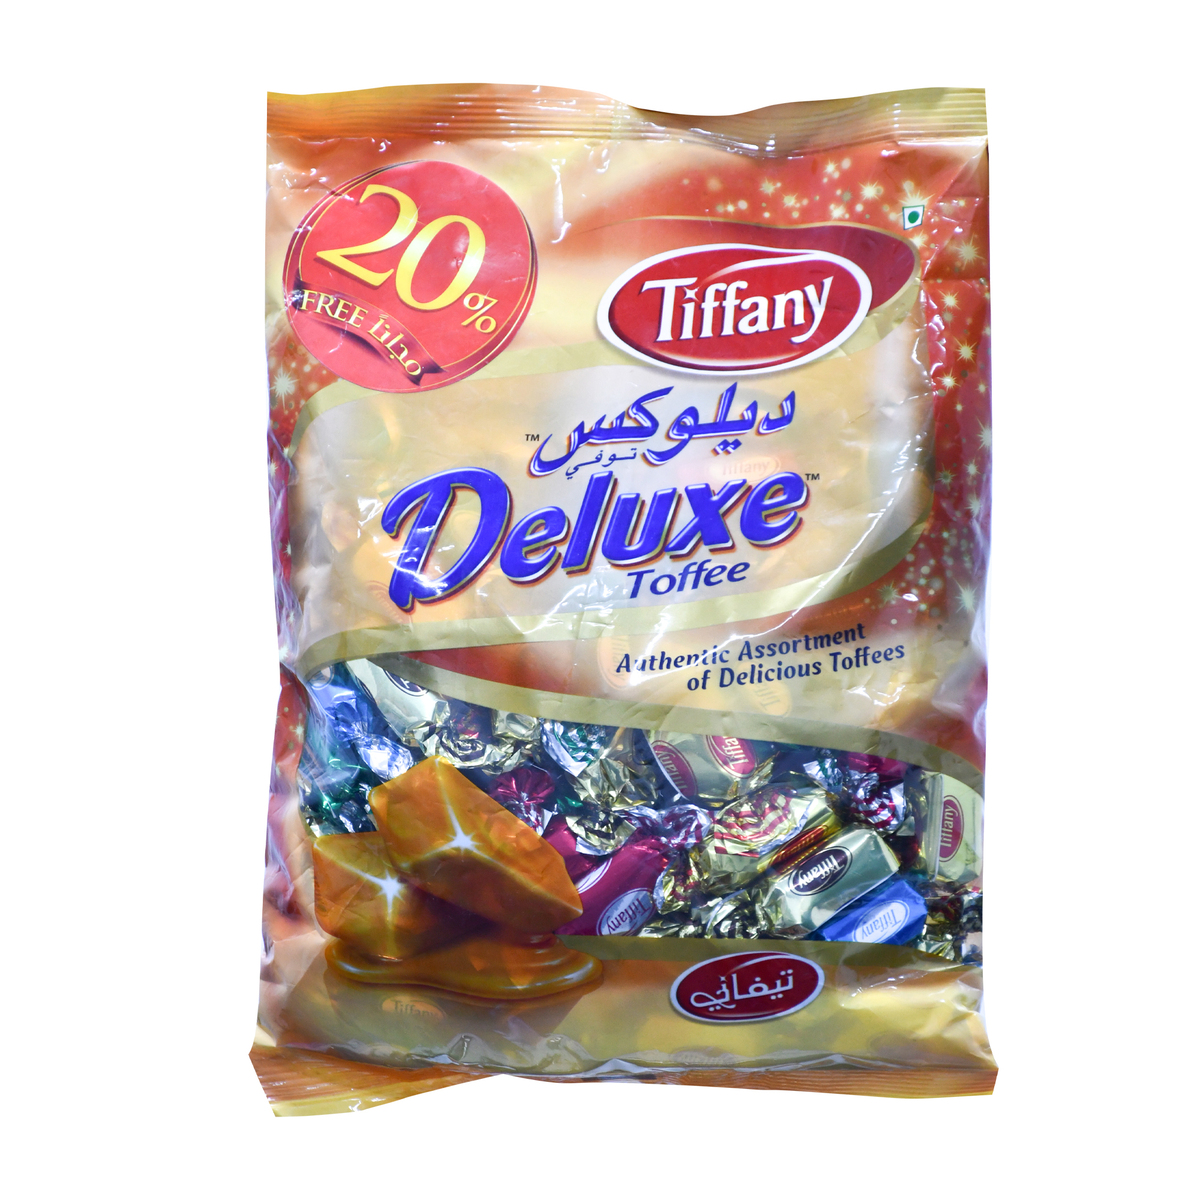 Tiffany Deluxe Toffee 750 g